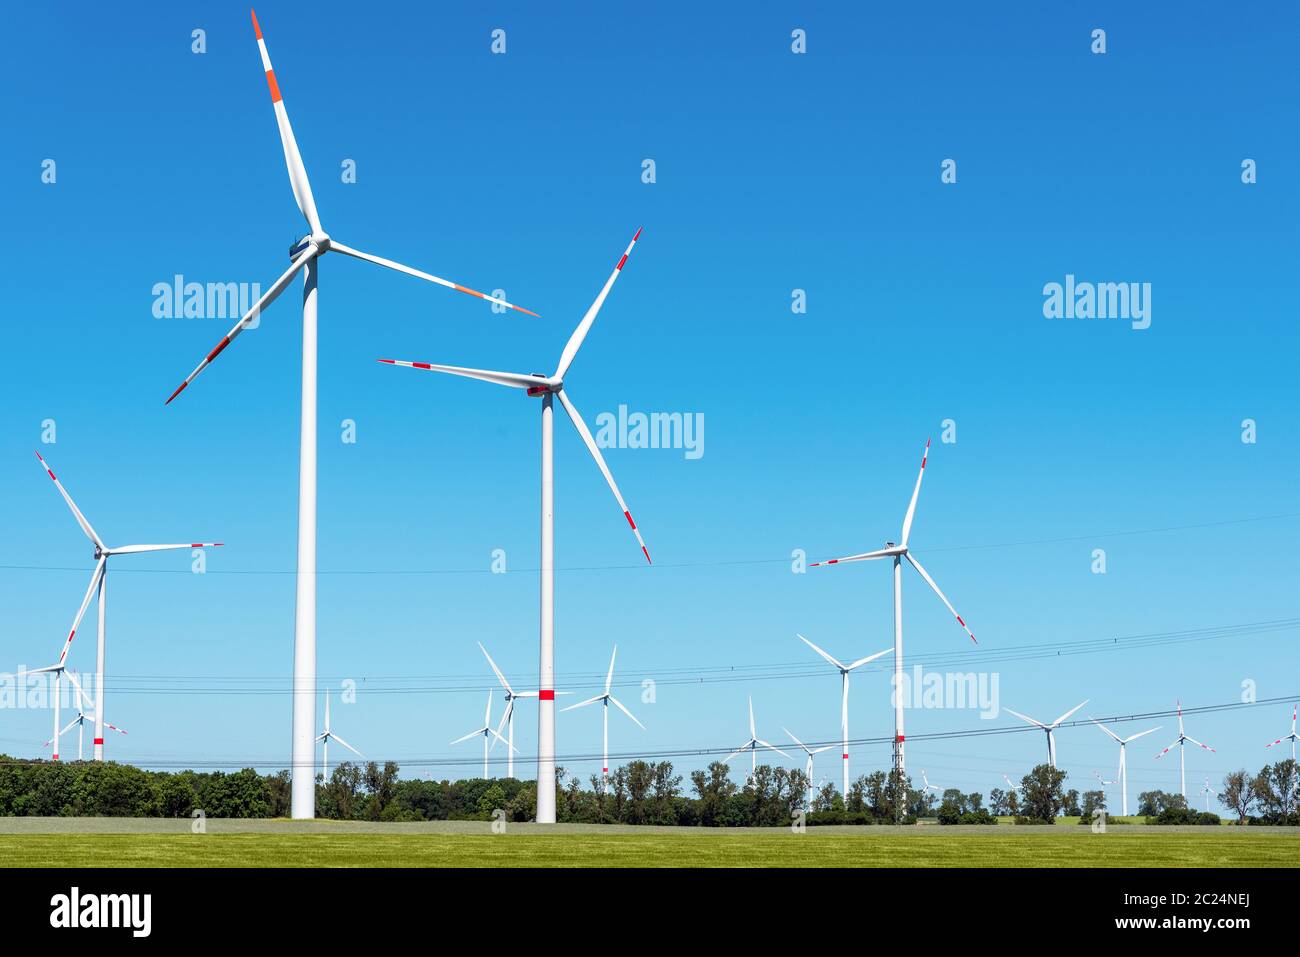 Wind turbines and power lines seen in Germany Stock Photo